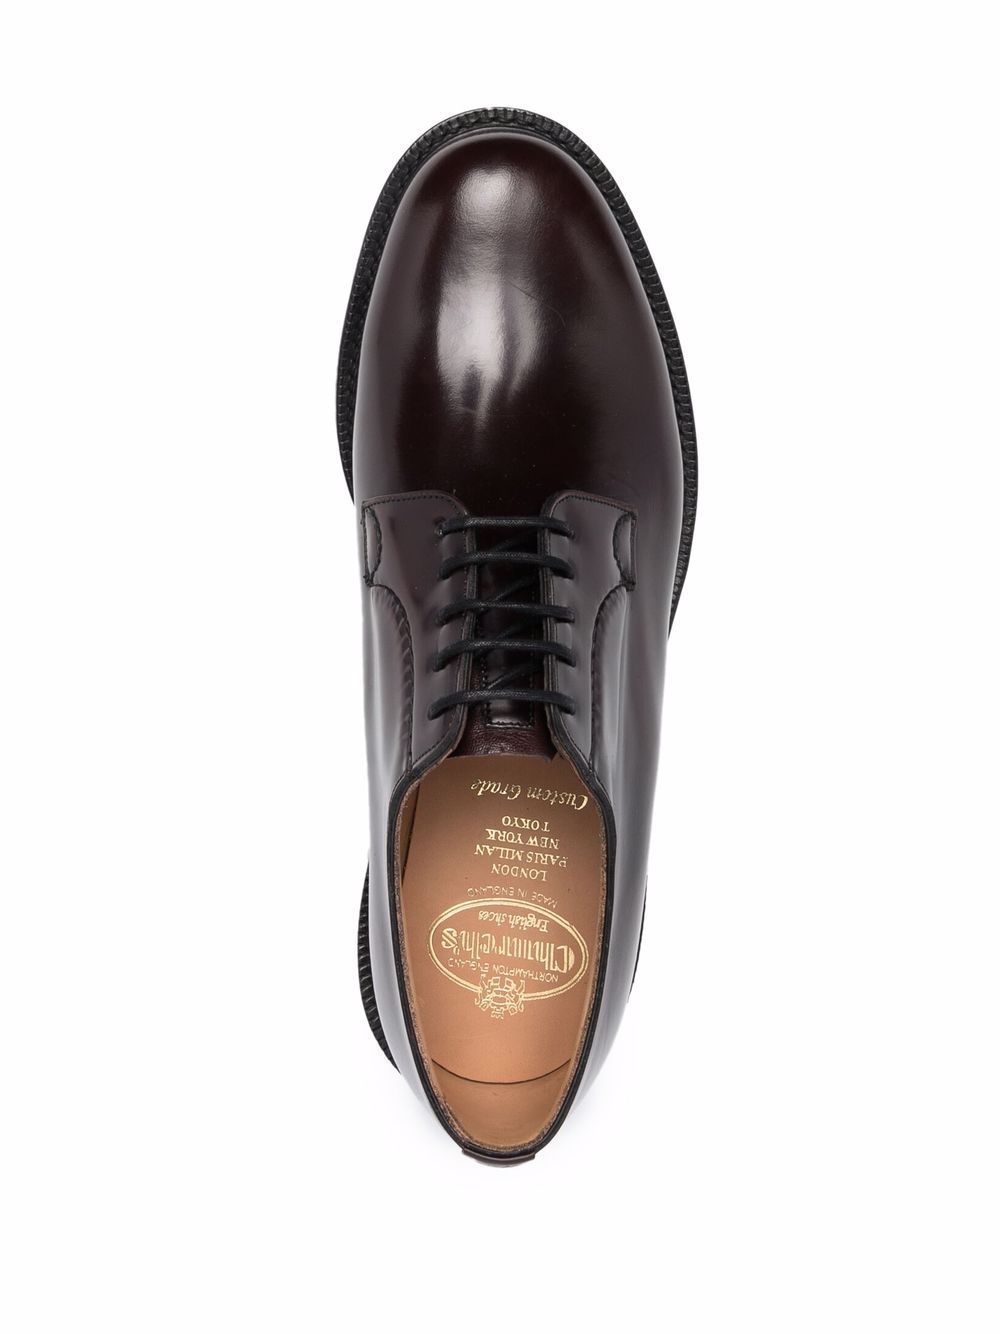 Shop Church's Shannon polished Derby shoes with Express Delivery - FARFETCH